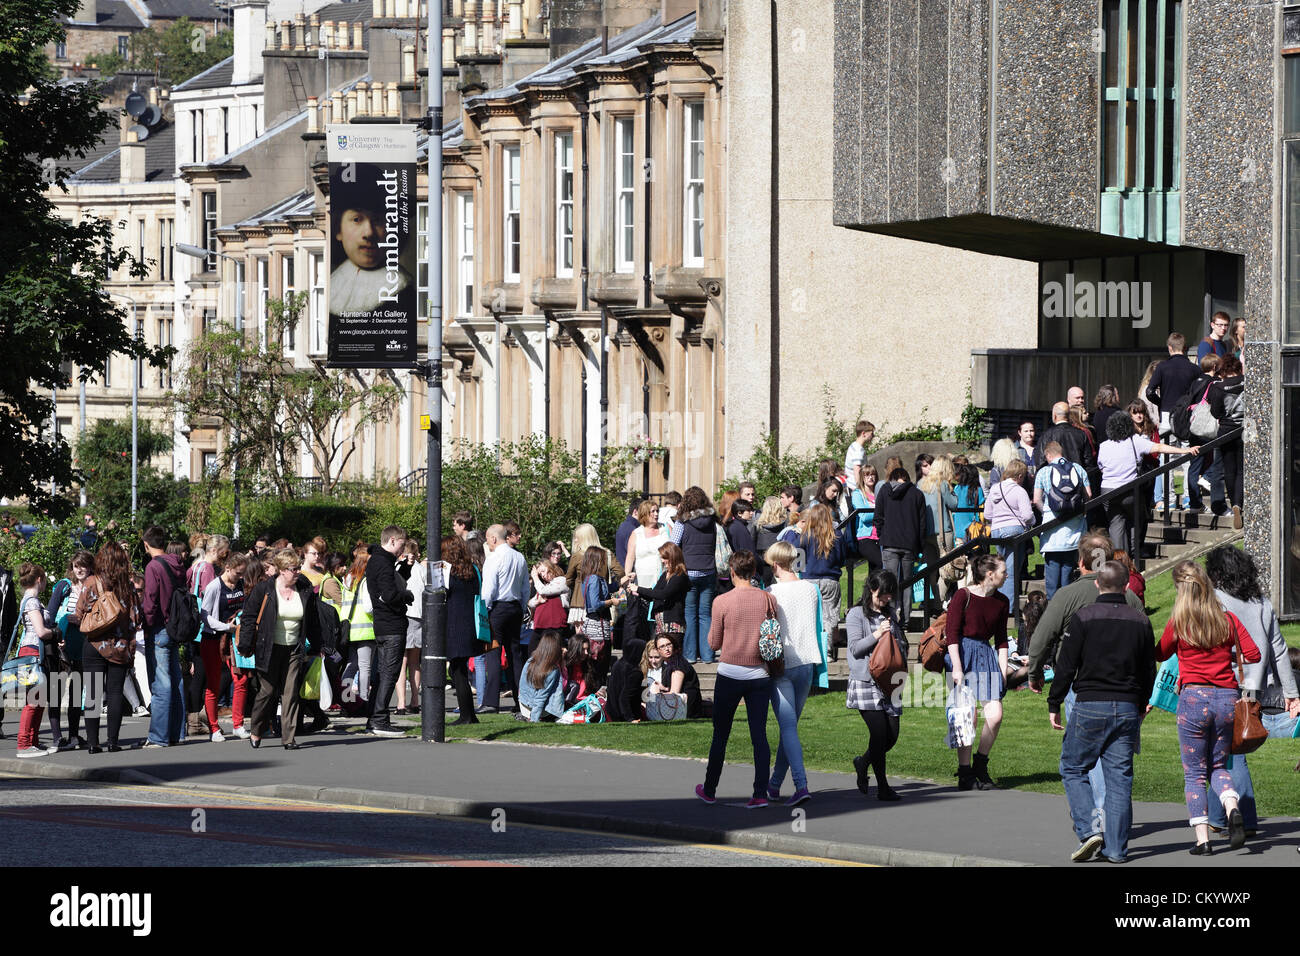 University Avenue, Glasgow, Scotland, UK, Wednesday, 5th September, 2012. People queuing outside the Boyd Orr Building at the Gilmorehill Campus on to take part in a busy University of Glasgow Undergraduate Open Day. Stock Photo